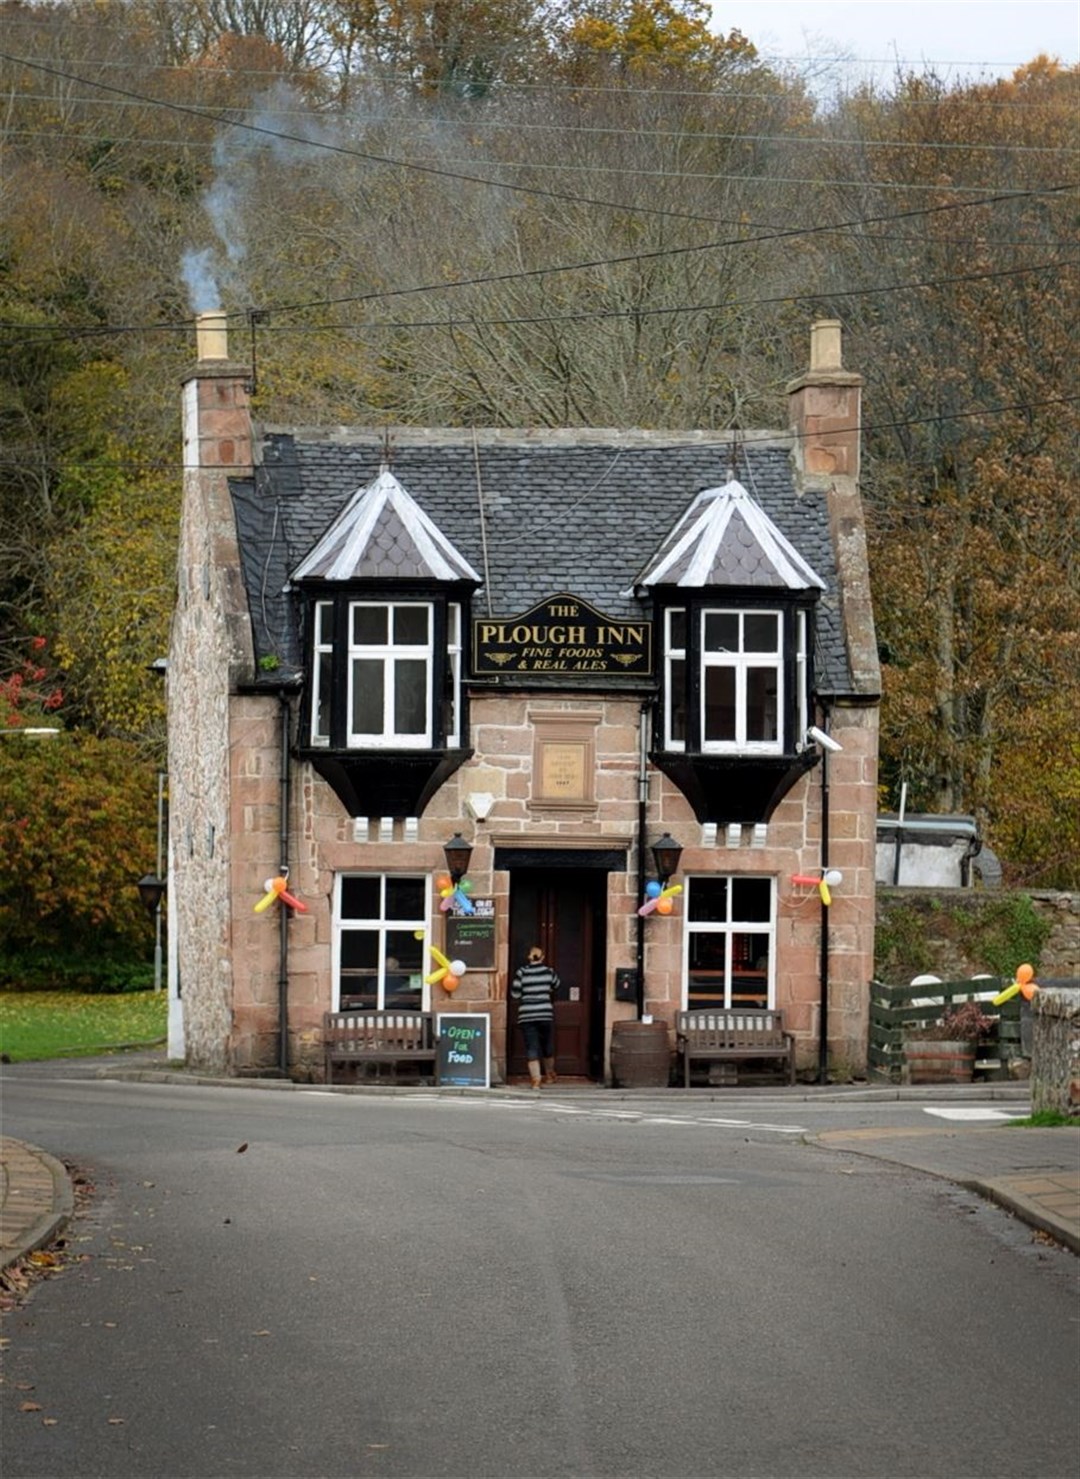 The Plough Inn: 'An integral part of Black Isle culture and community'.